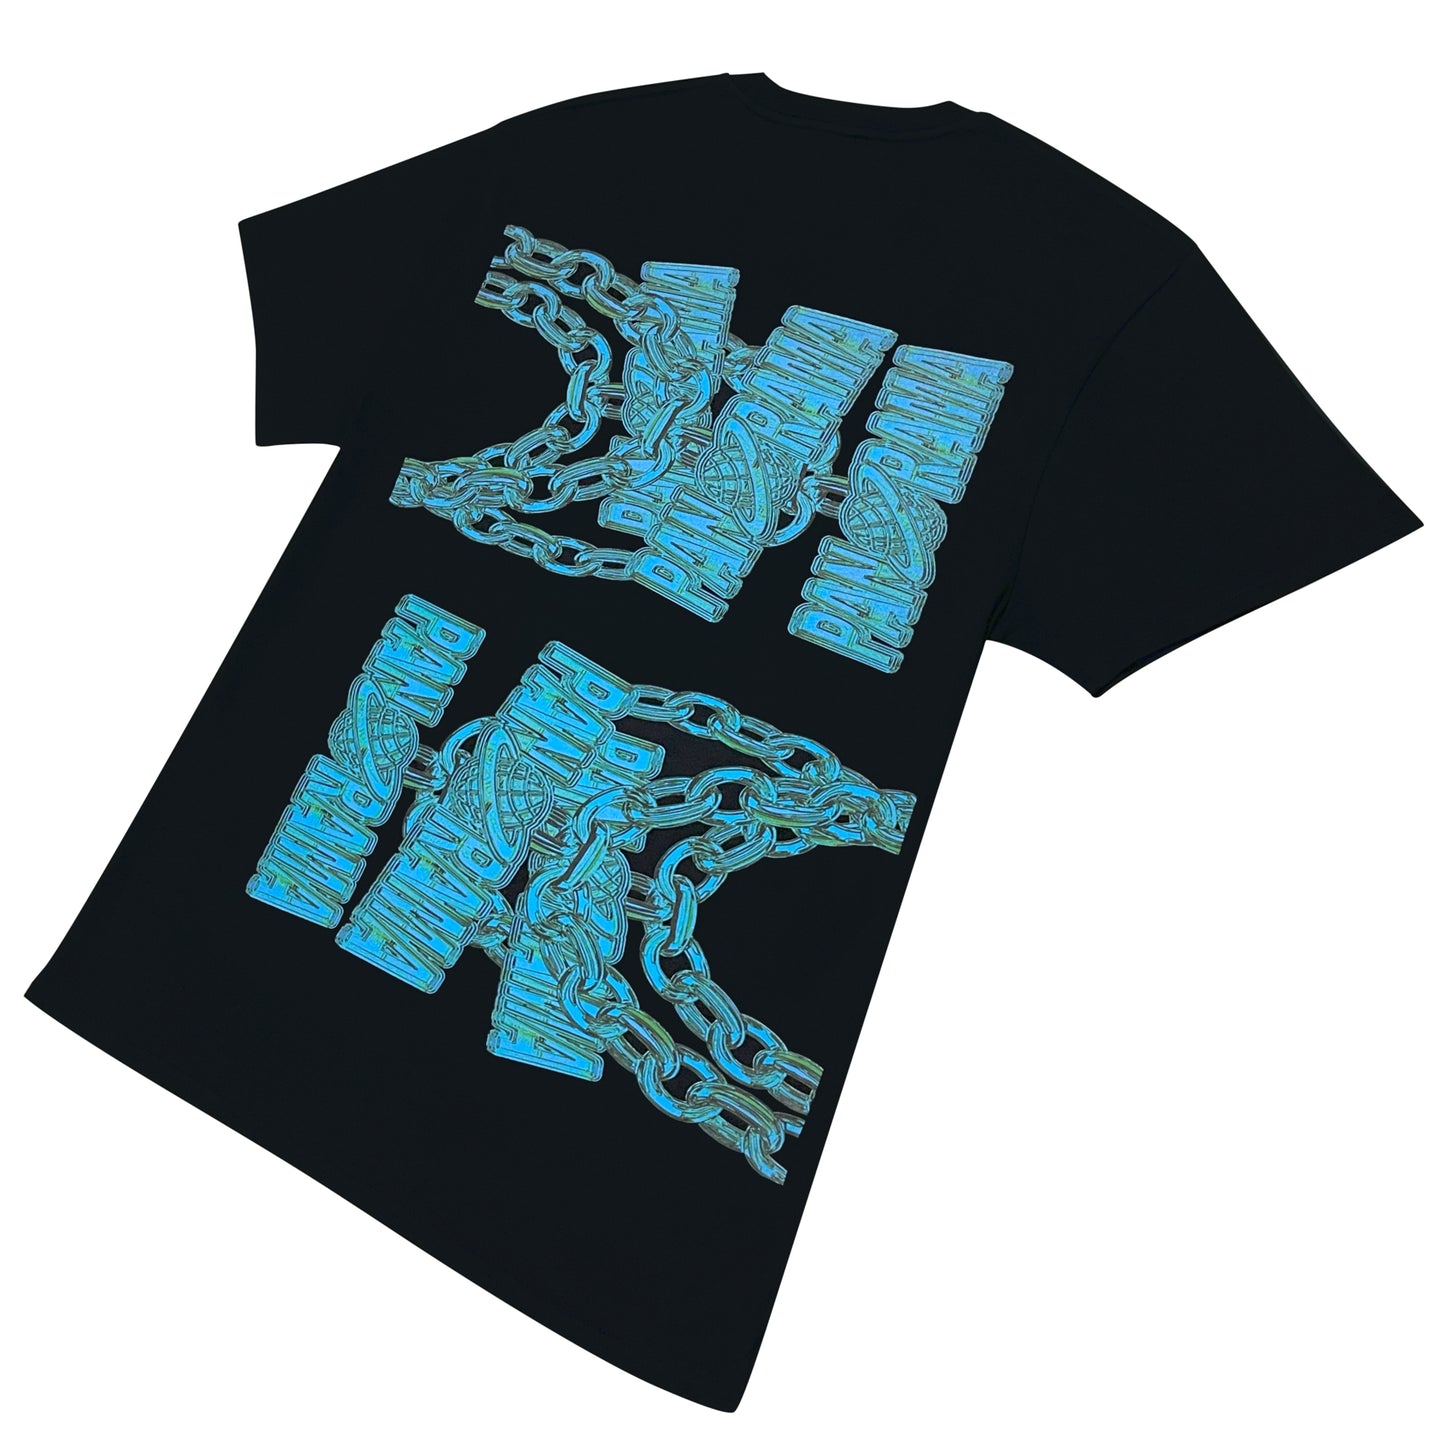 PANORAMA TEAL CHAINS T-SHIRT